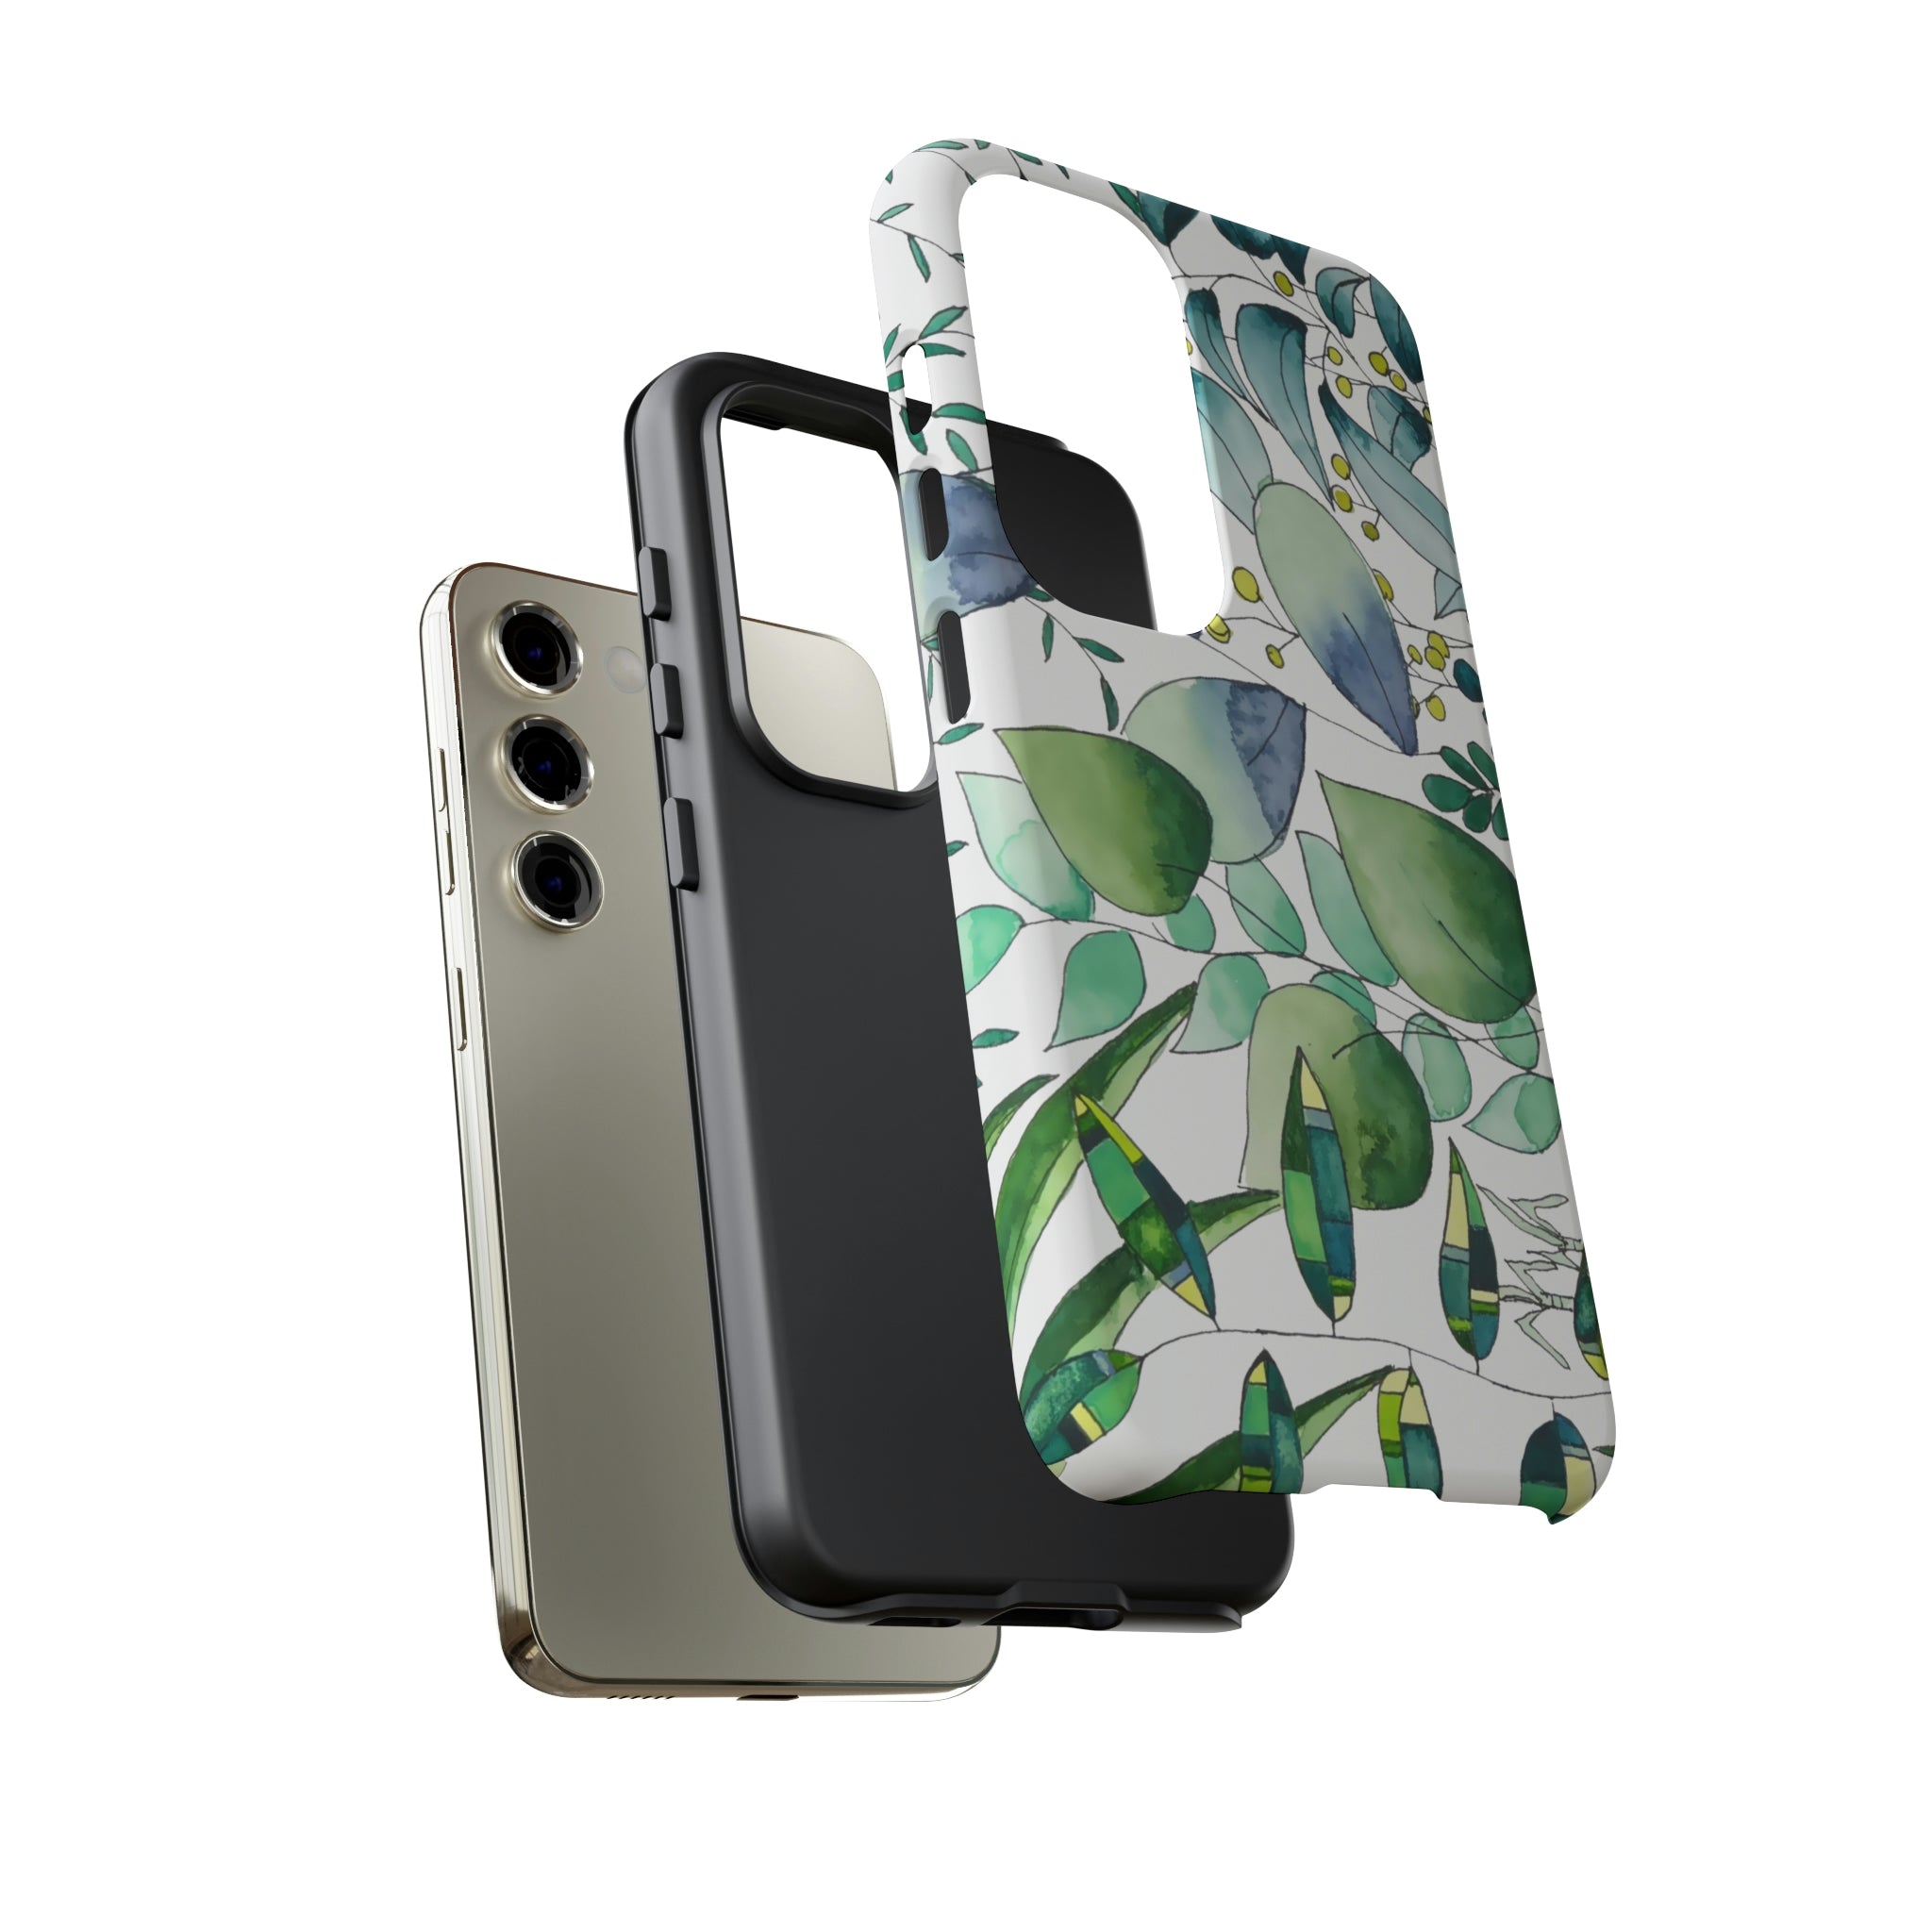 Aniplant Whimsy Botanical Print on Cell Phone Cases | Apple iPhone, Samsung Galaxy, Google Pixel